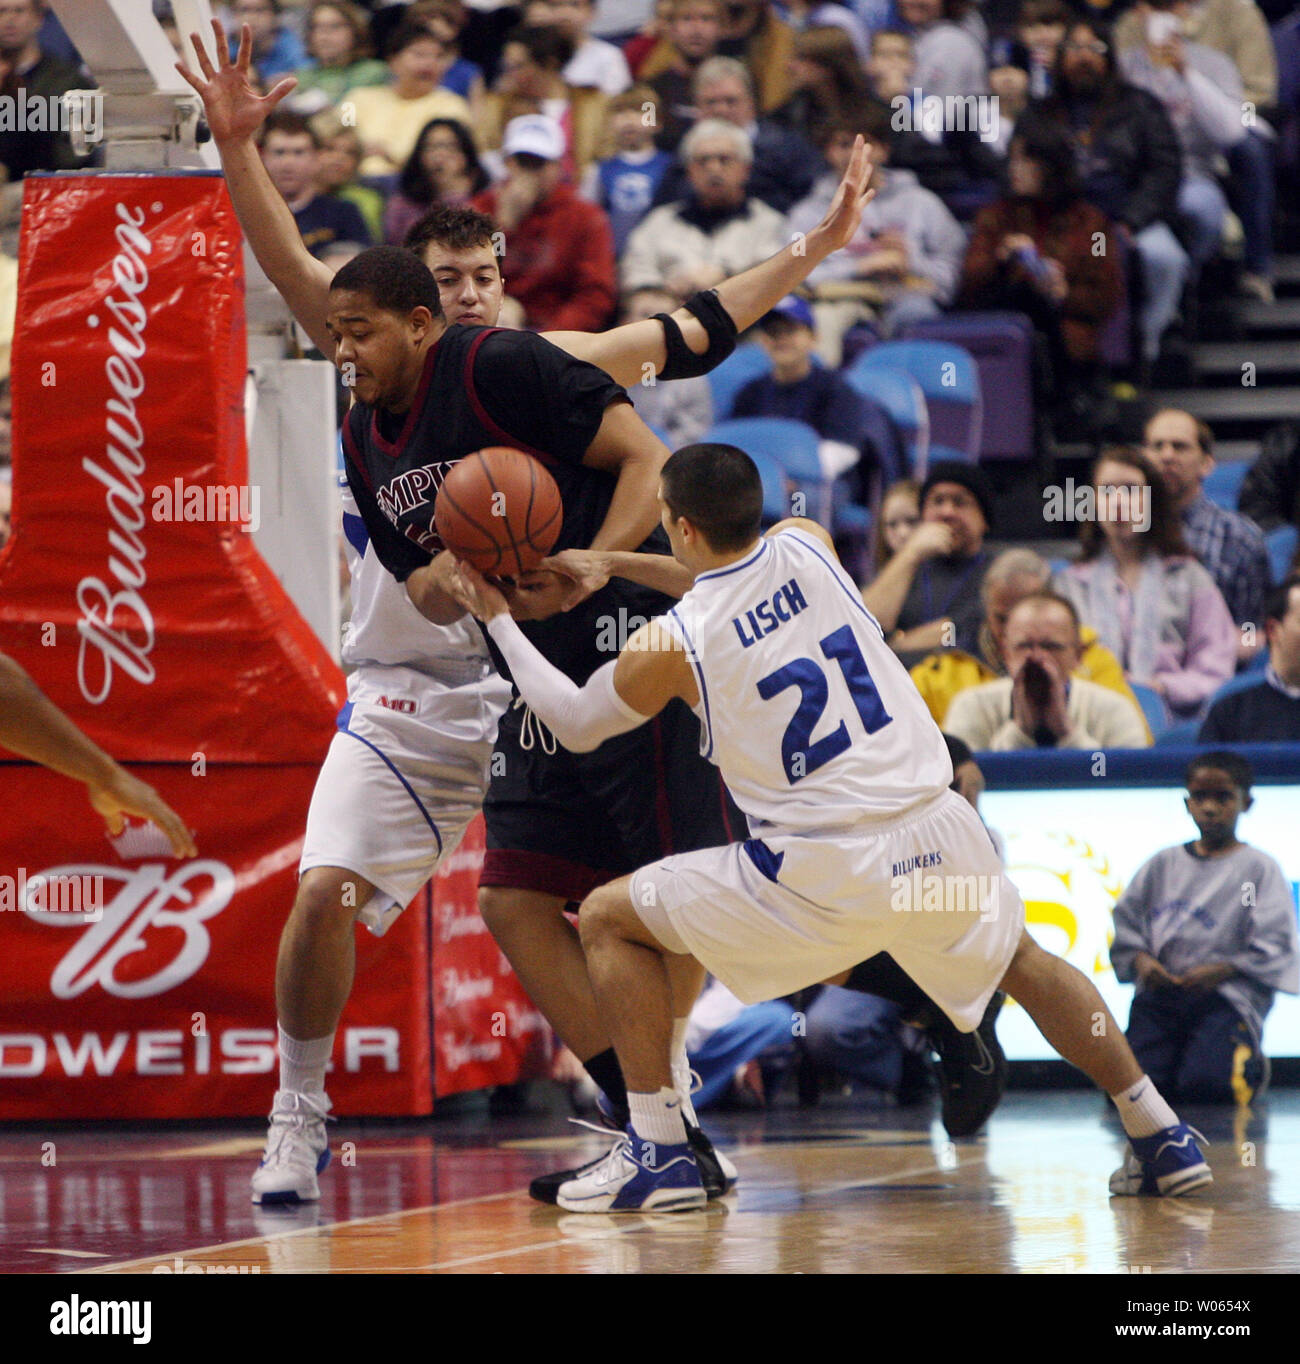 Saint Louis University's Ian Vouyoukas defends while Kevin Lisch (21) takes  the basketball away fromTemple's Wayne Marshall during the first half at  the Savvis Center in St. Louis on February 18, 2006. (